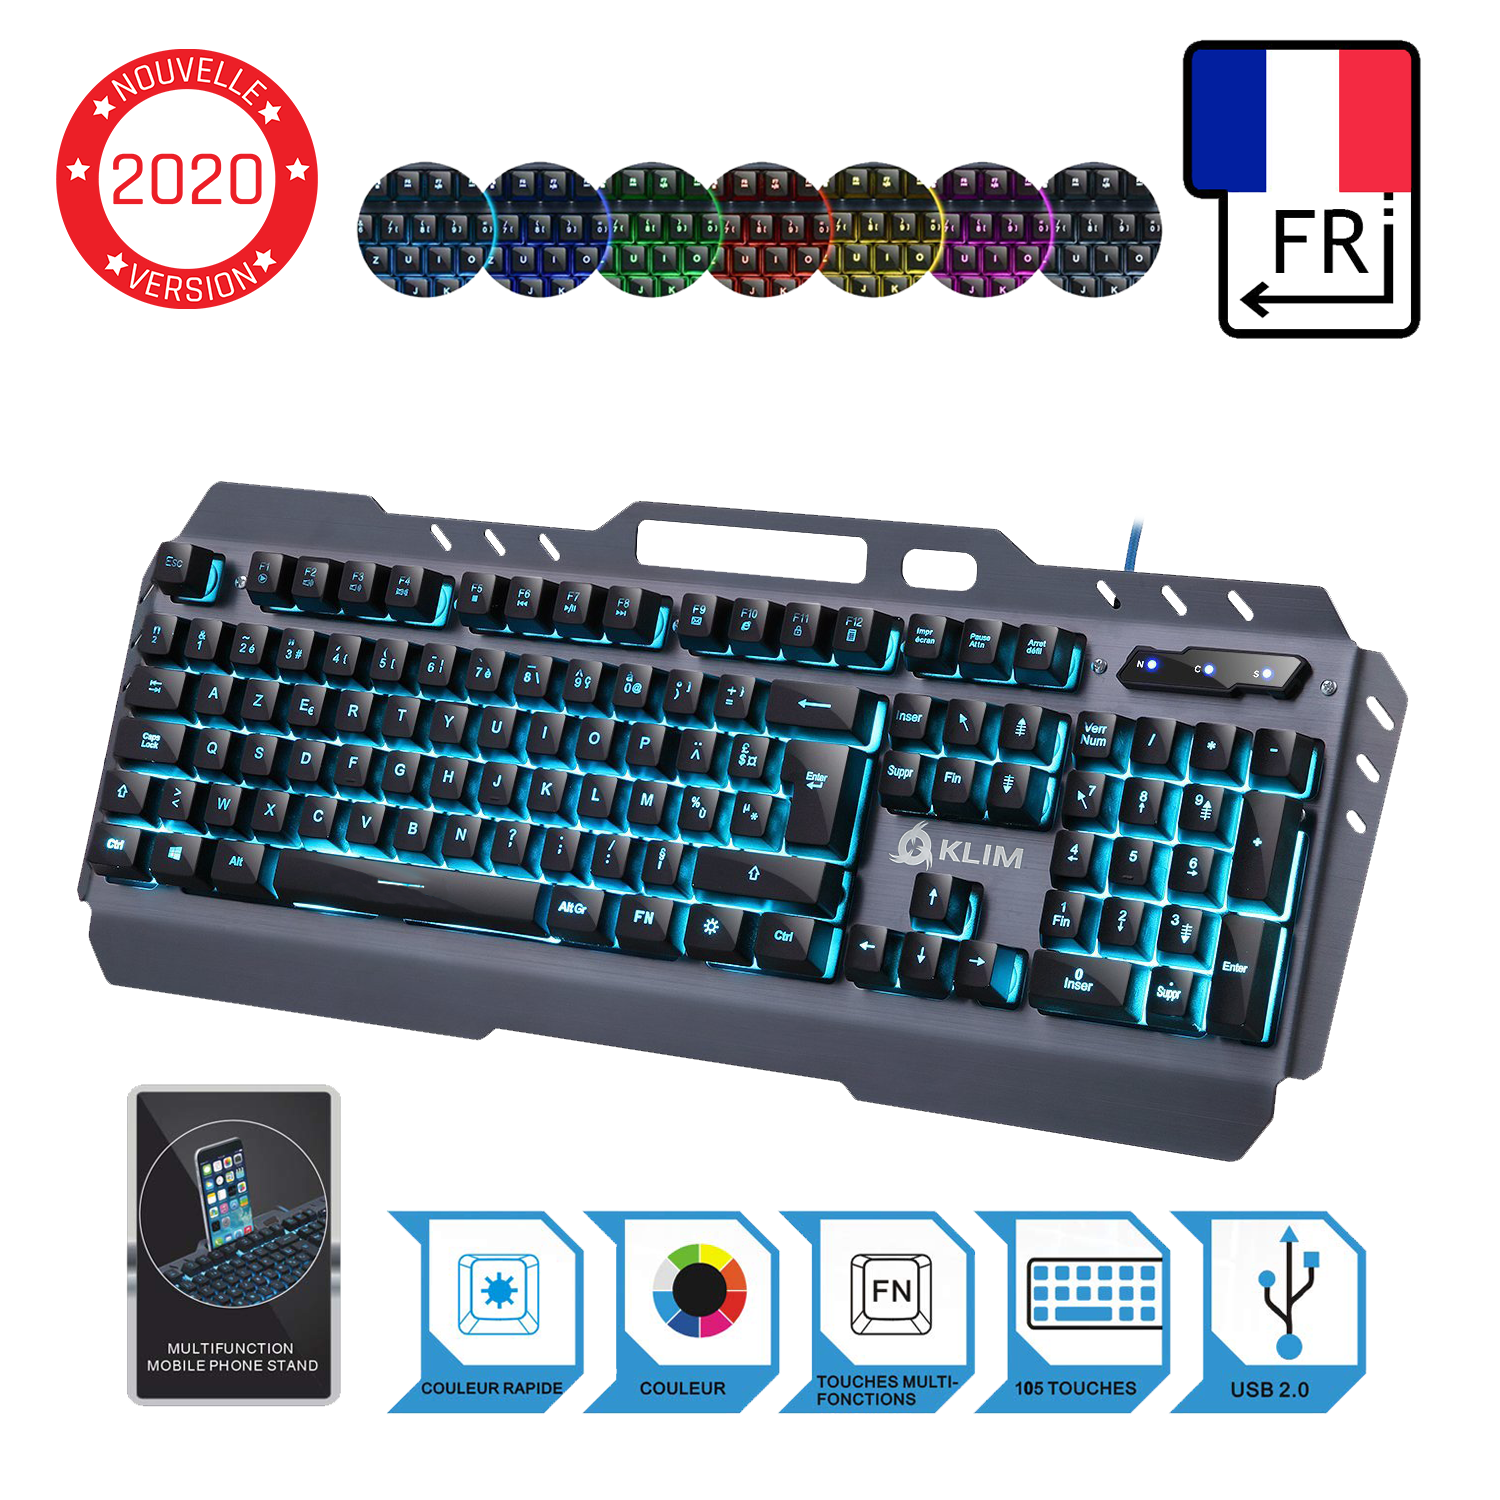 Couverture Claviers Gaming